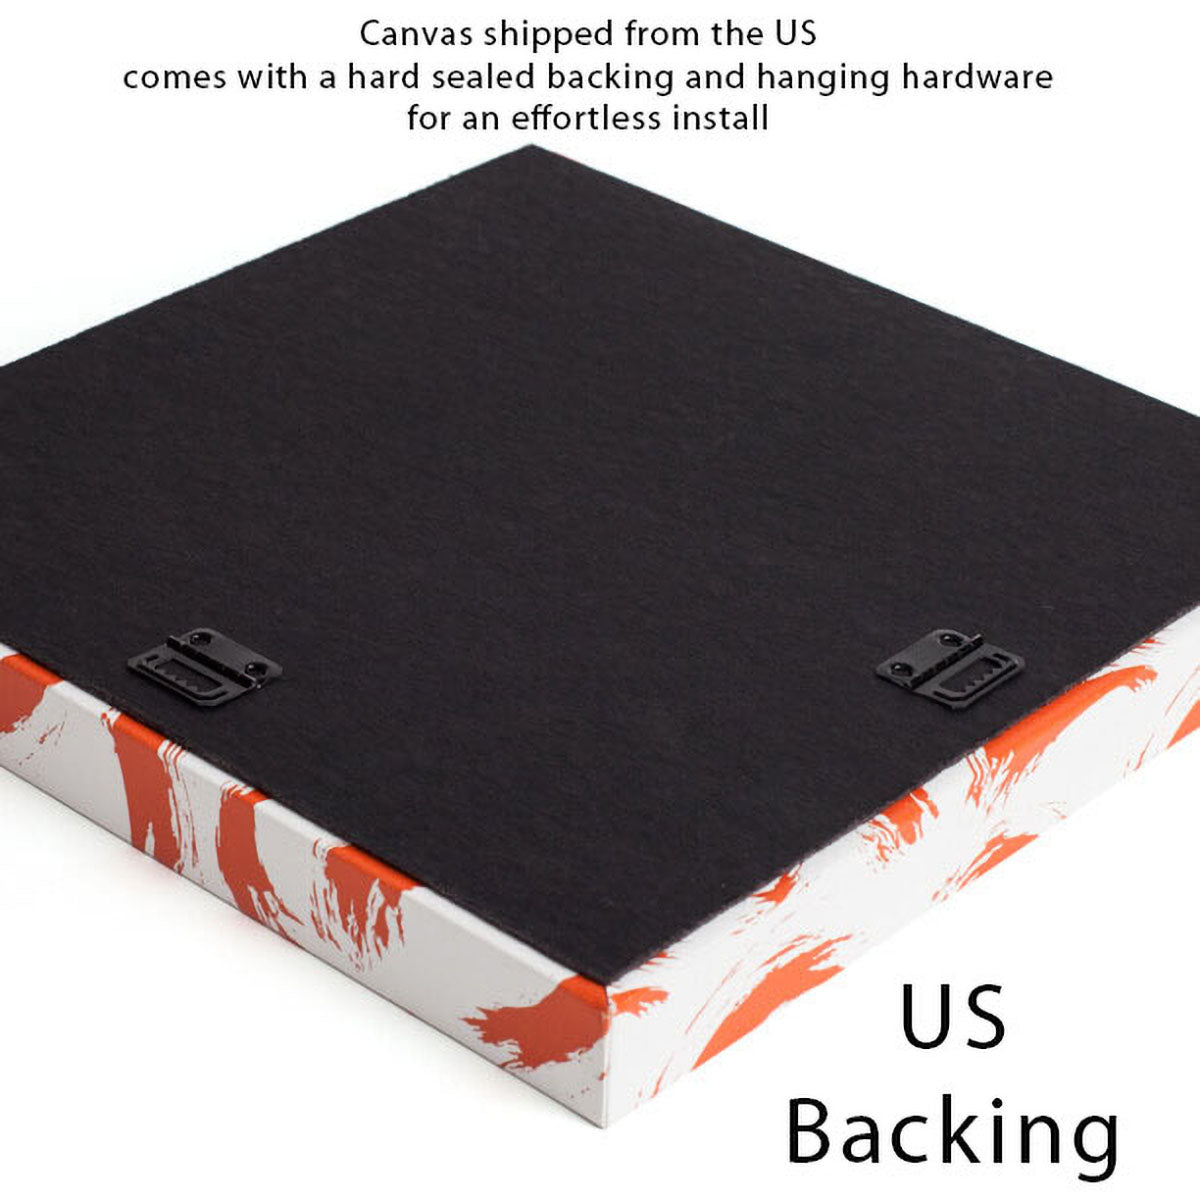 back of canvas when shipped to the USA